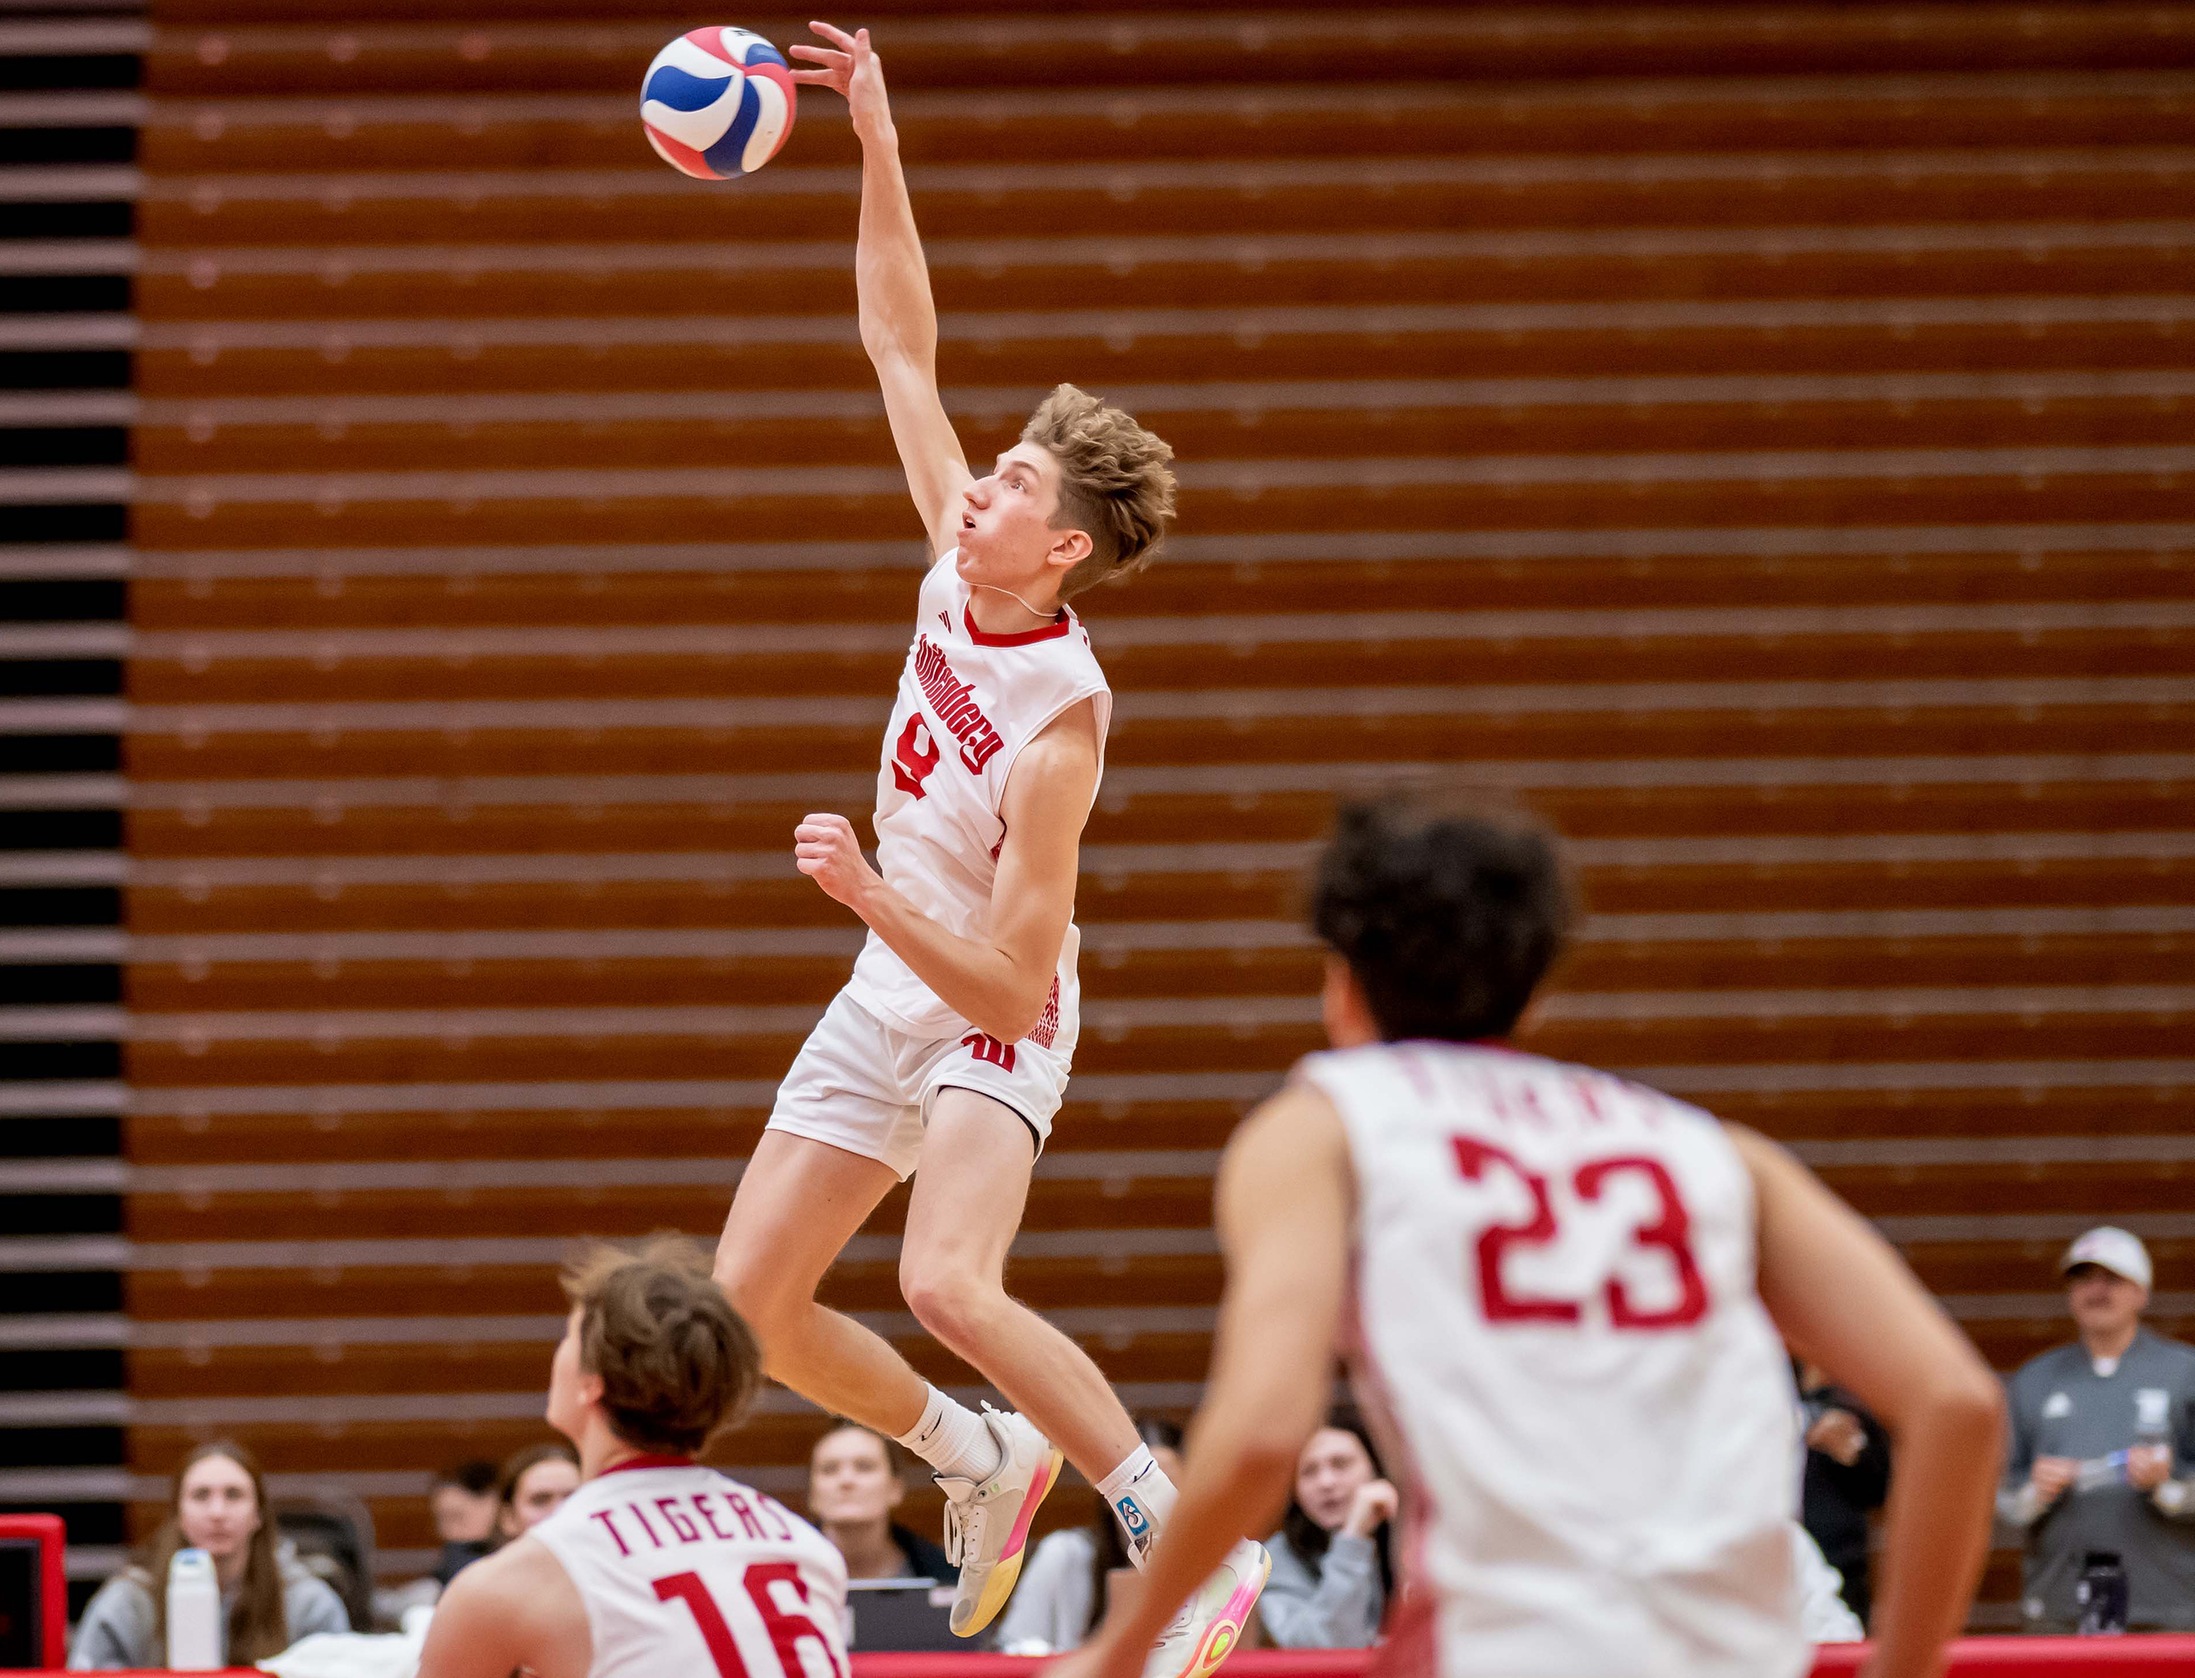 Sophomore Michael Yurk tied for the team lead with 16 kills in the Tigers' 3-1 loss to No. 17 Benedictine (Ill.) on Friday night. | Photo by John Coffman